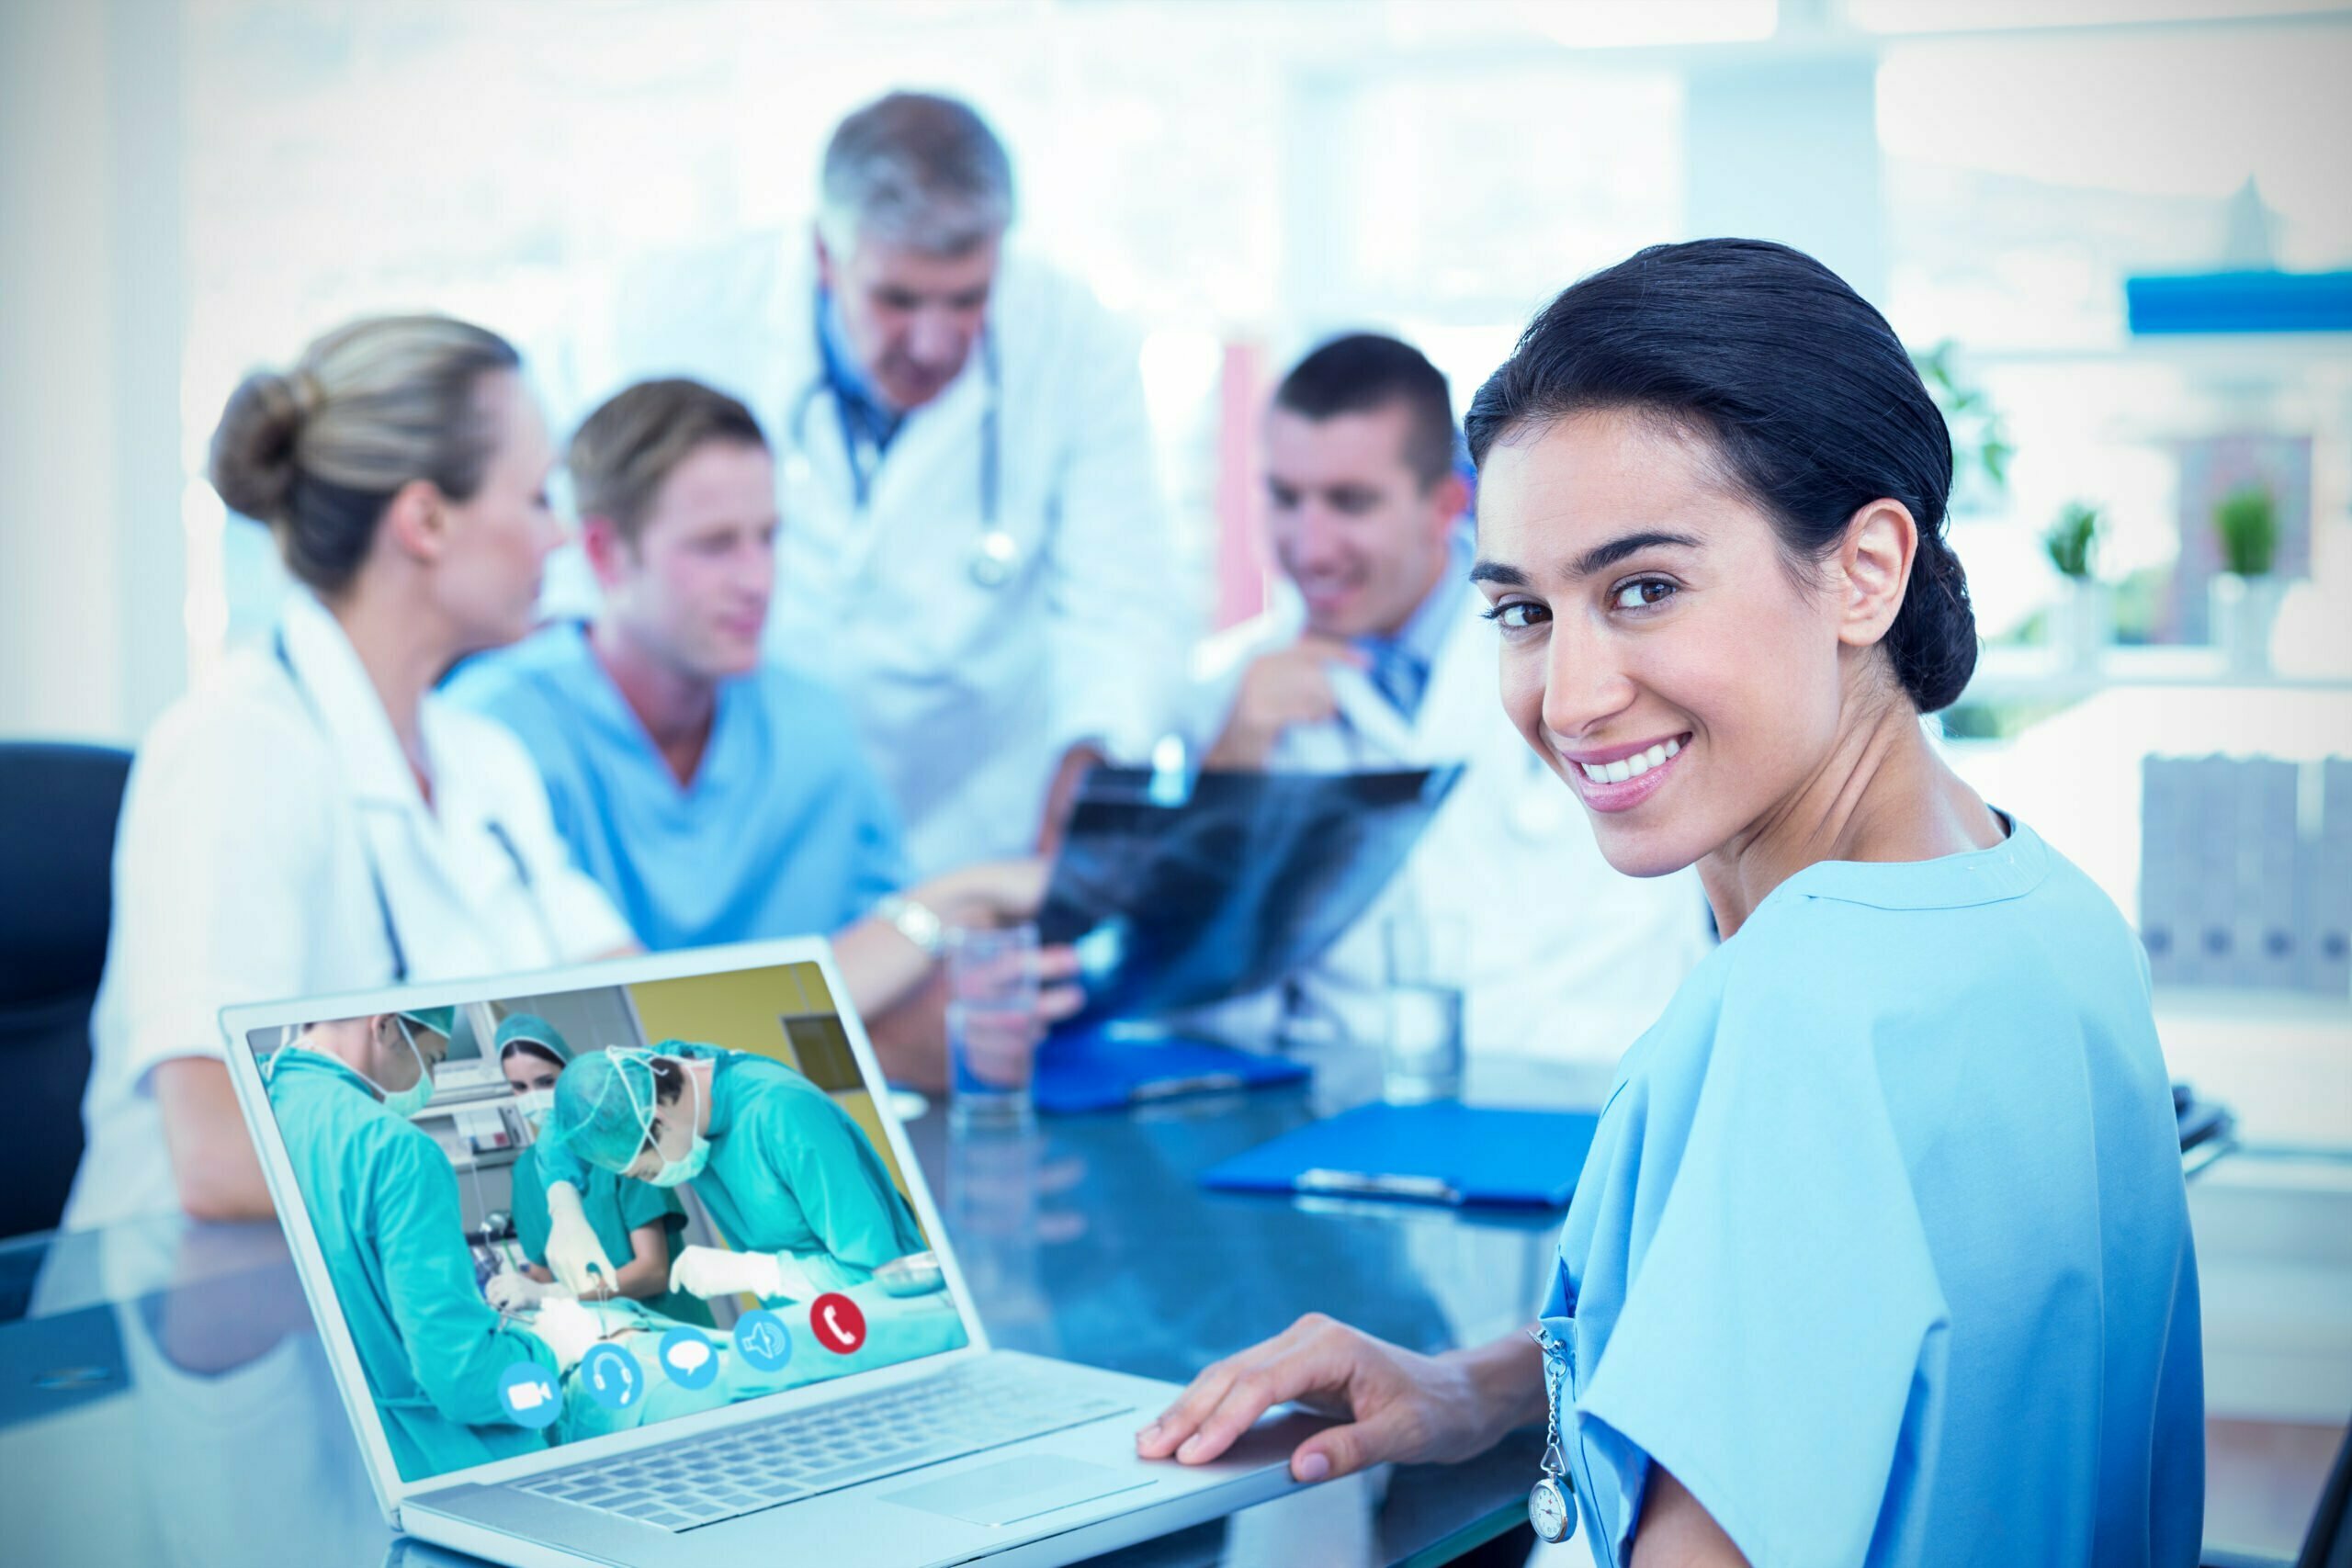 Beautiful smiling doctor typing on keyboard with her team behind against view of video chat app